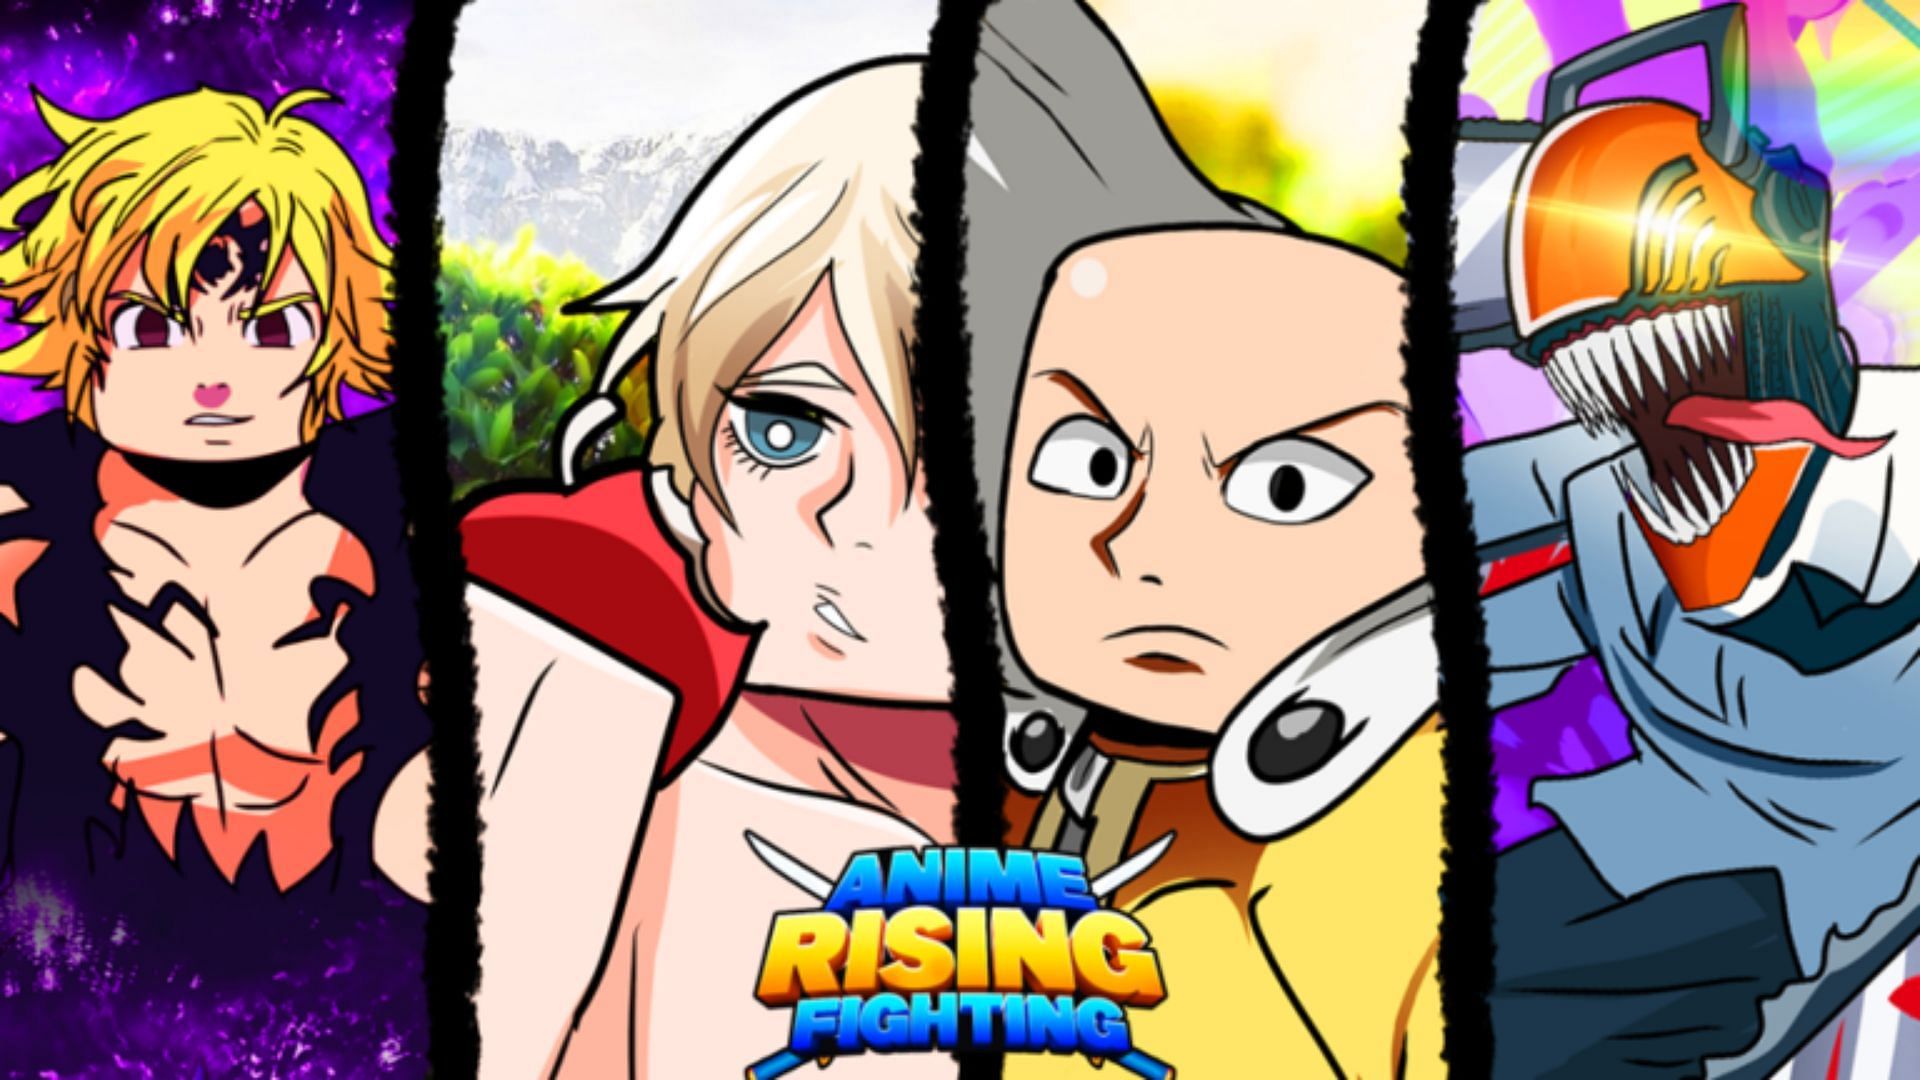 Codes for Anime Rising Fighting and their importance (Image via Roblox)